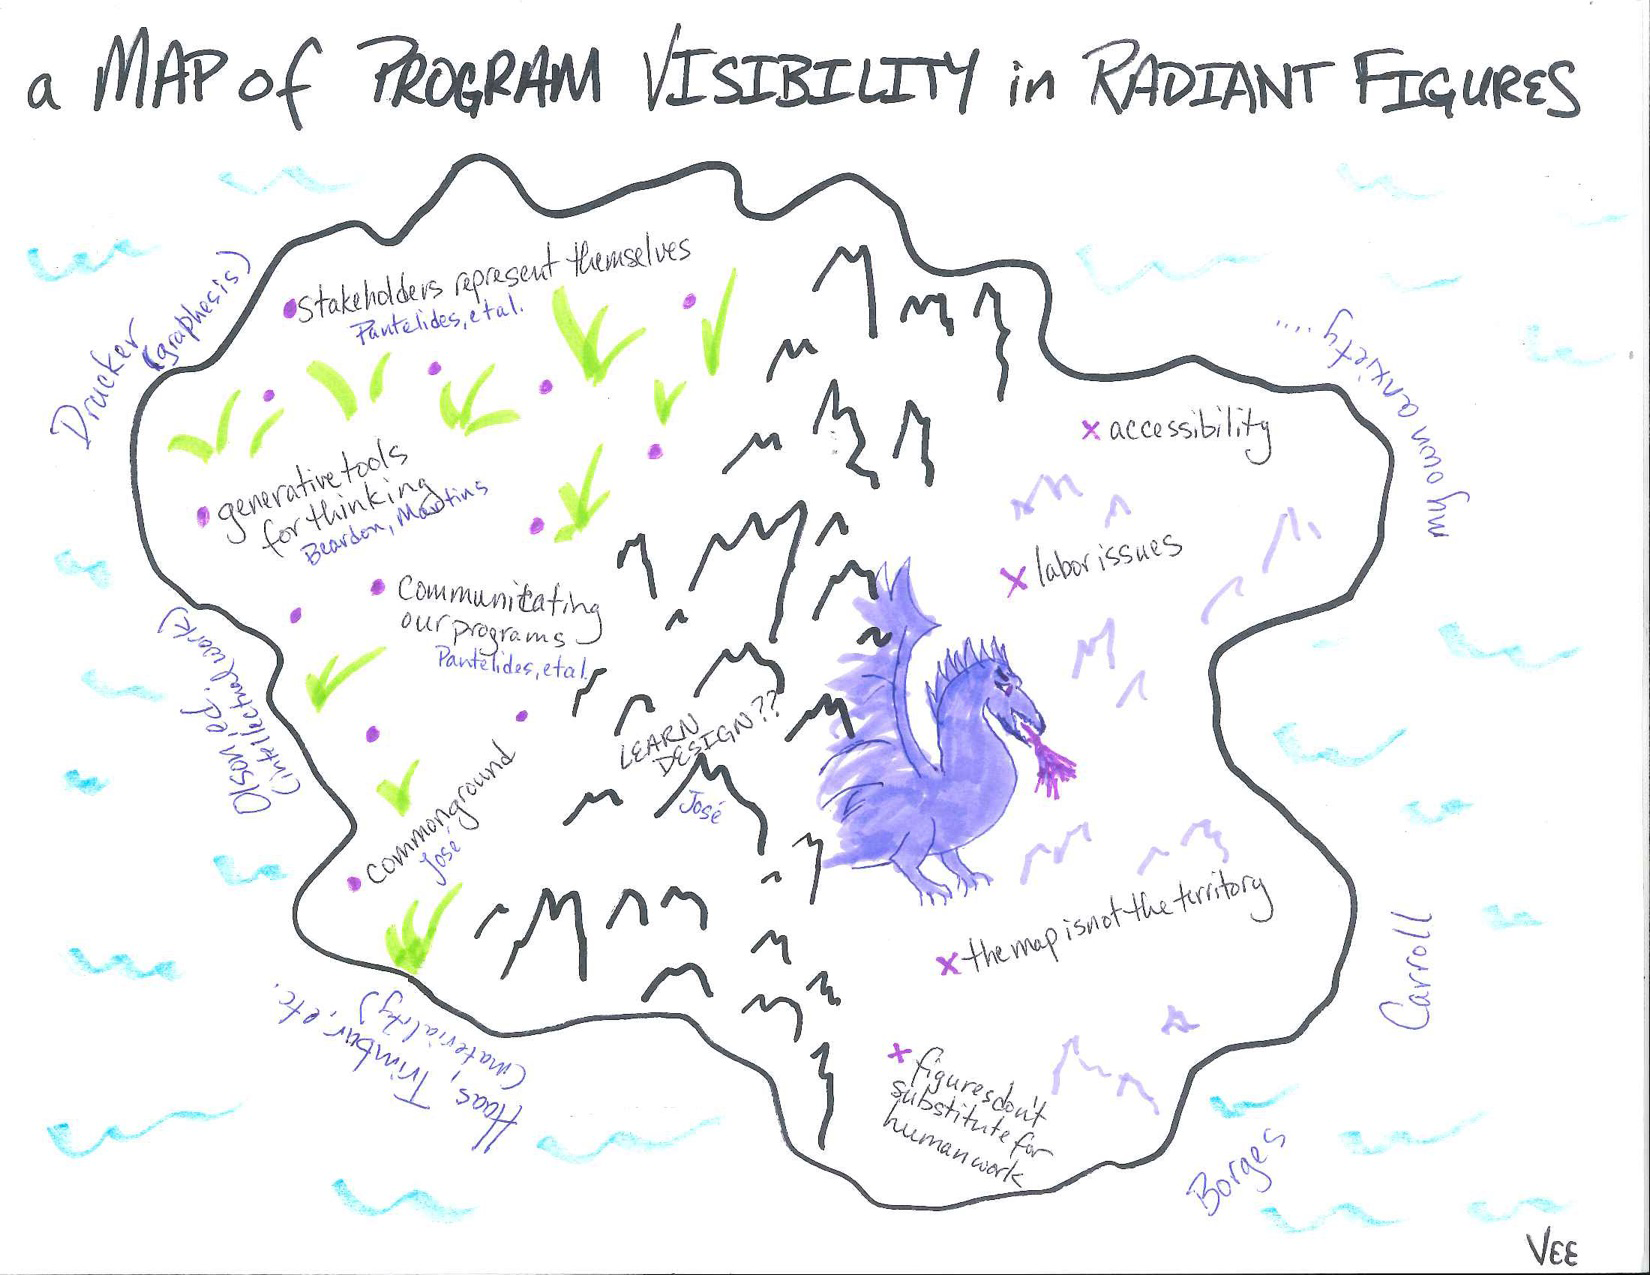 Figure 1. A hand illustrated map of program visibility in <em>Radiant Figures</em>. The sketch features an island with a dragon and a mountain range running vertically through the land mass. The left side of the island features grassy plains annotated with positive qualities of visual rhetorics in everyday administrative contexts. The right side of the map includes cautions, concerns, and perilous dimensions of visual rhetorics in everyday administrative contexts.